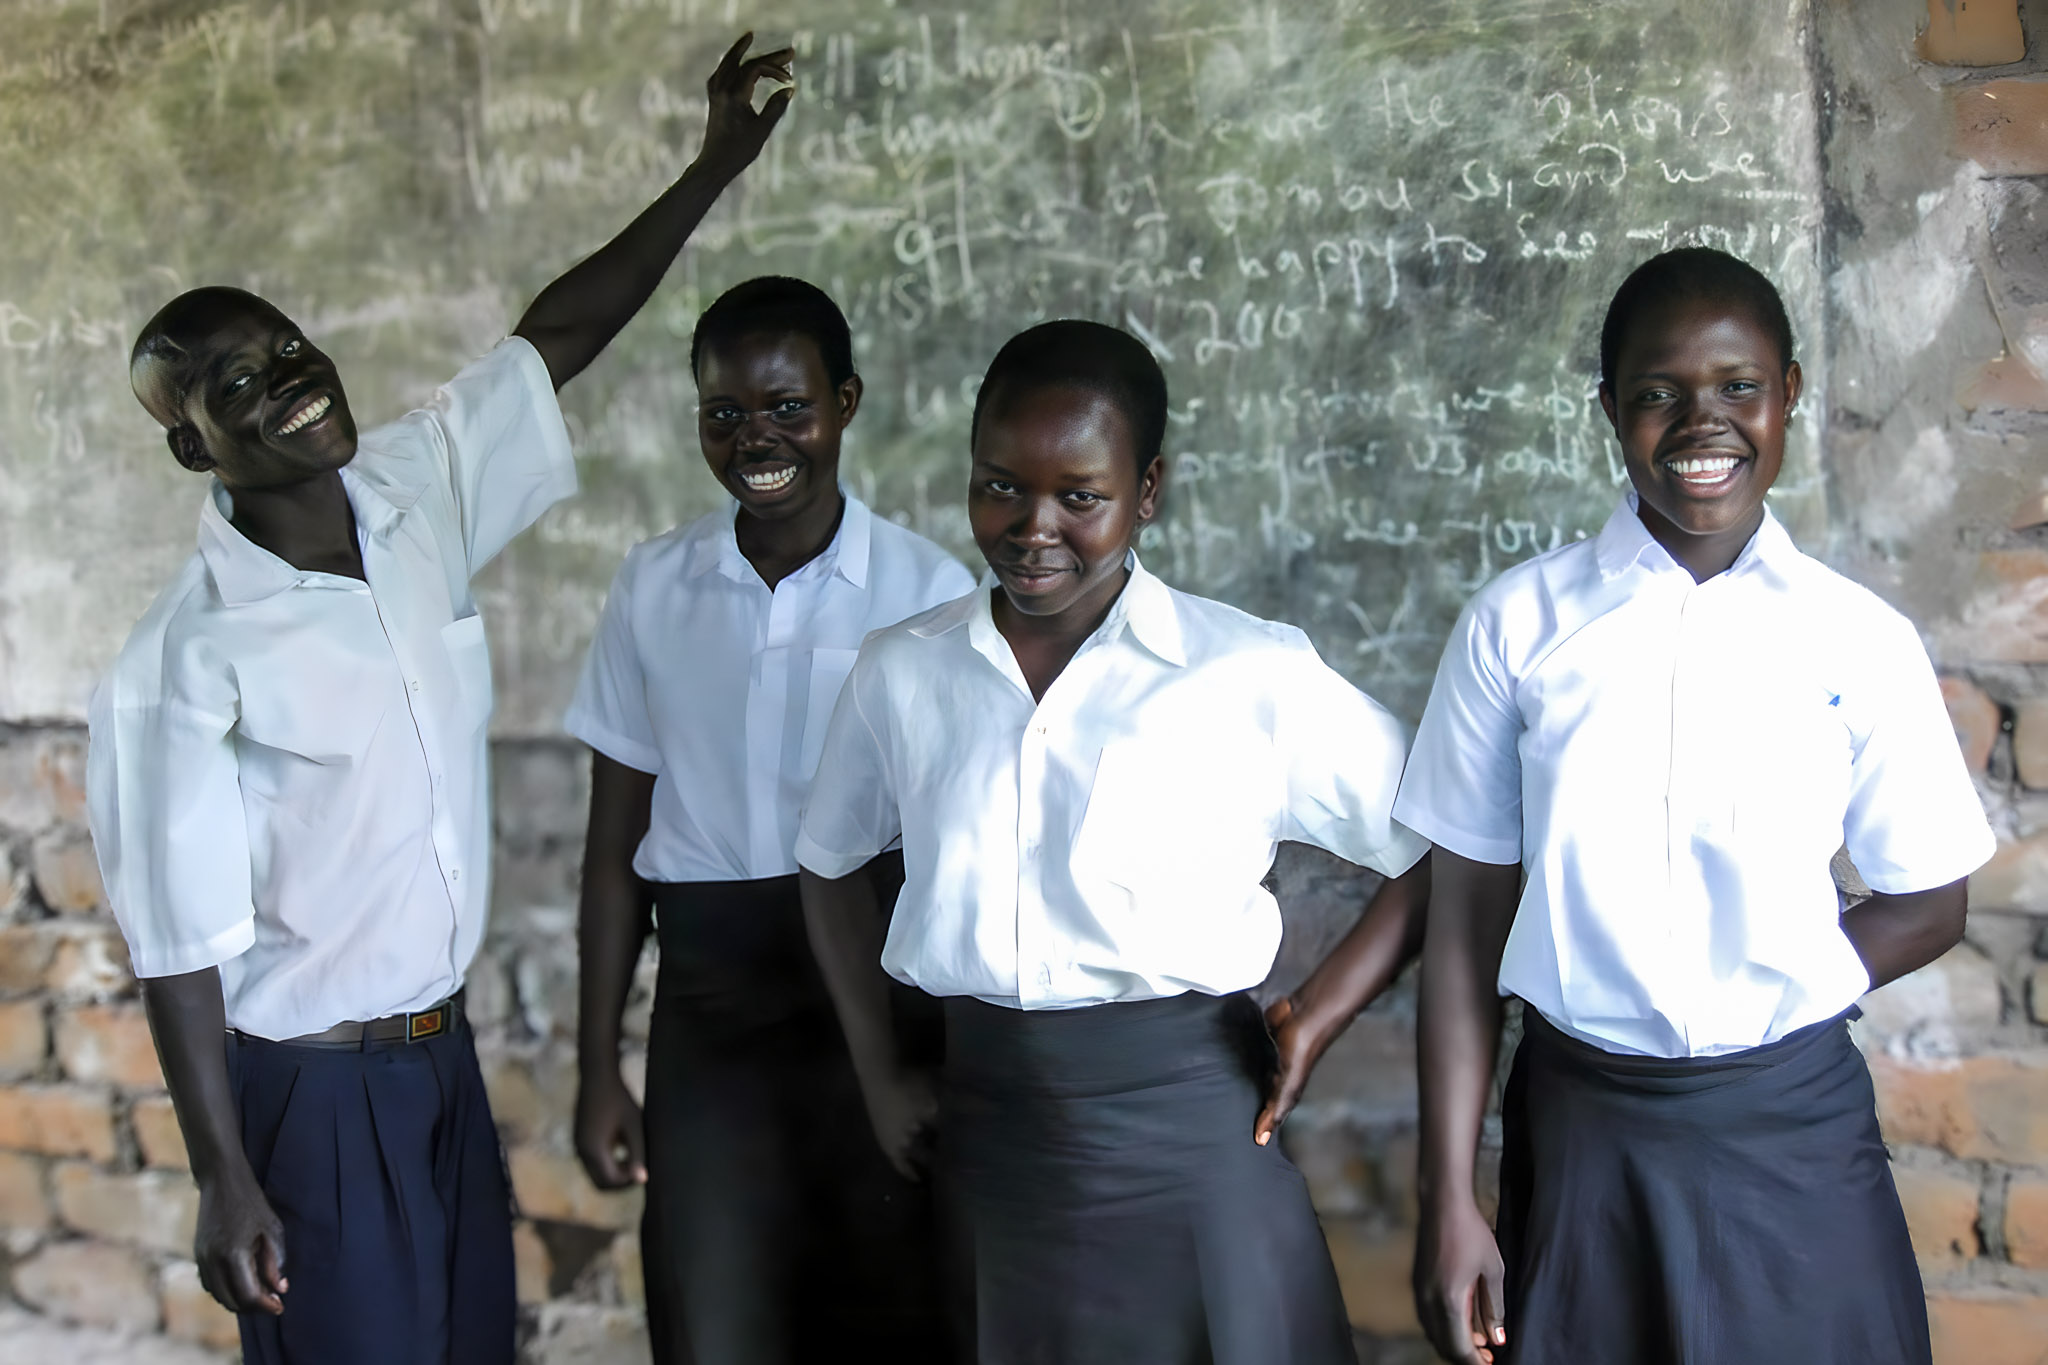 Gender Equity through Education in South Sudan